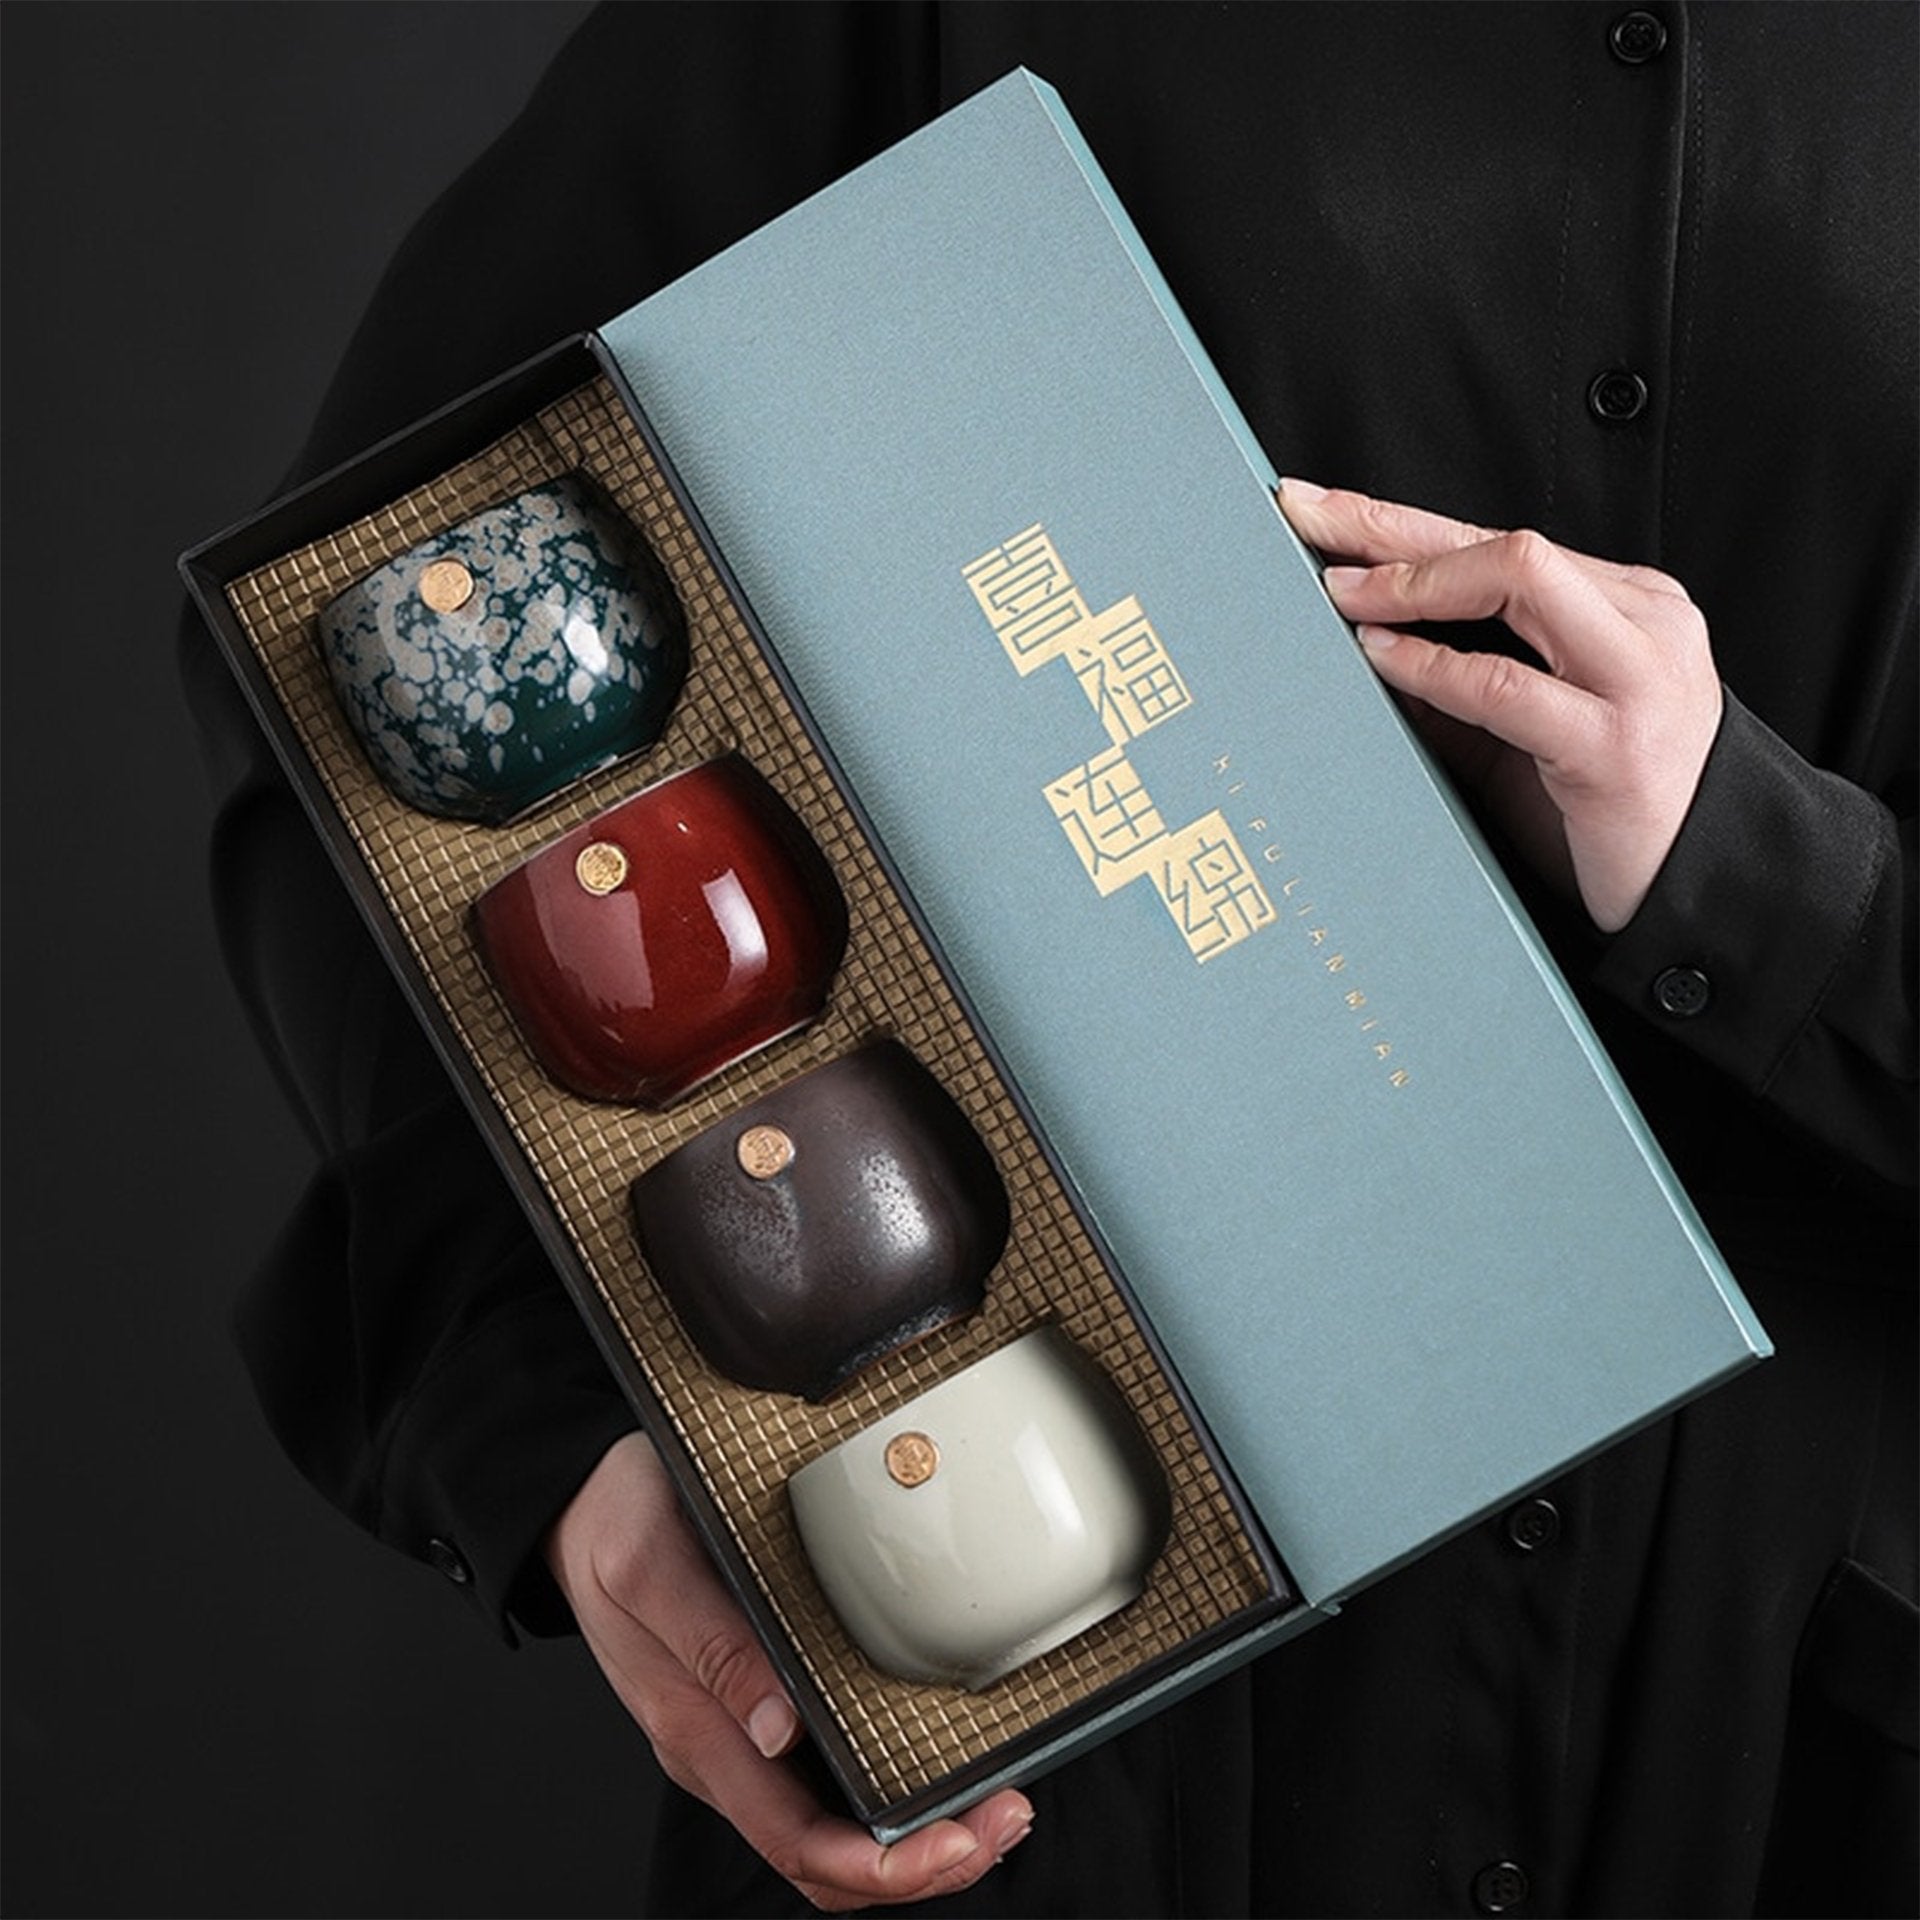 Person holding a gift box containing four Japanese-style teacups with gold seals.